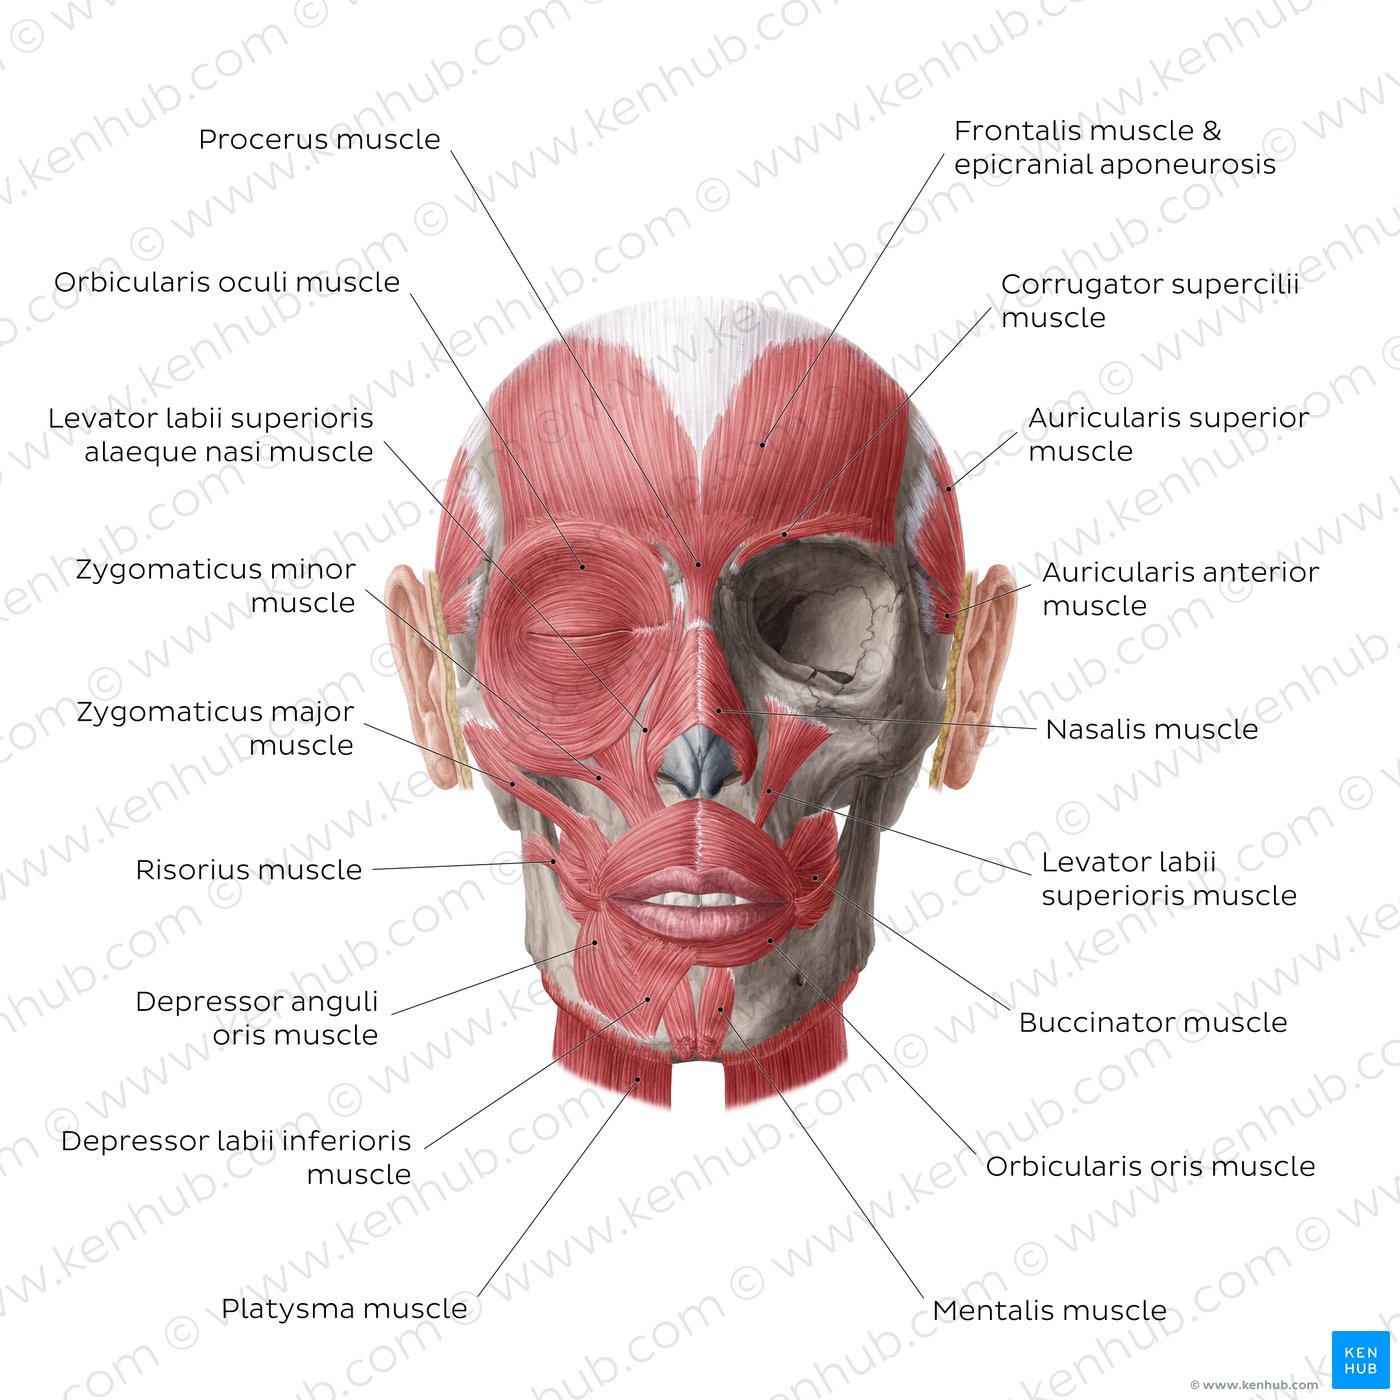 Facial Muscles: Anatomy, Function And Clinical Cases | Kenhub